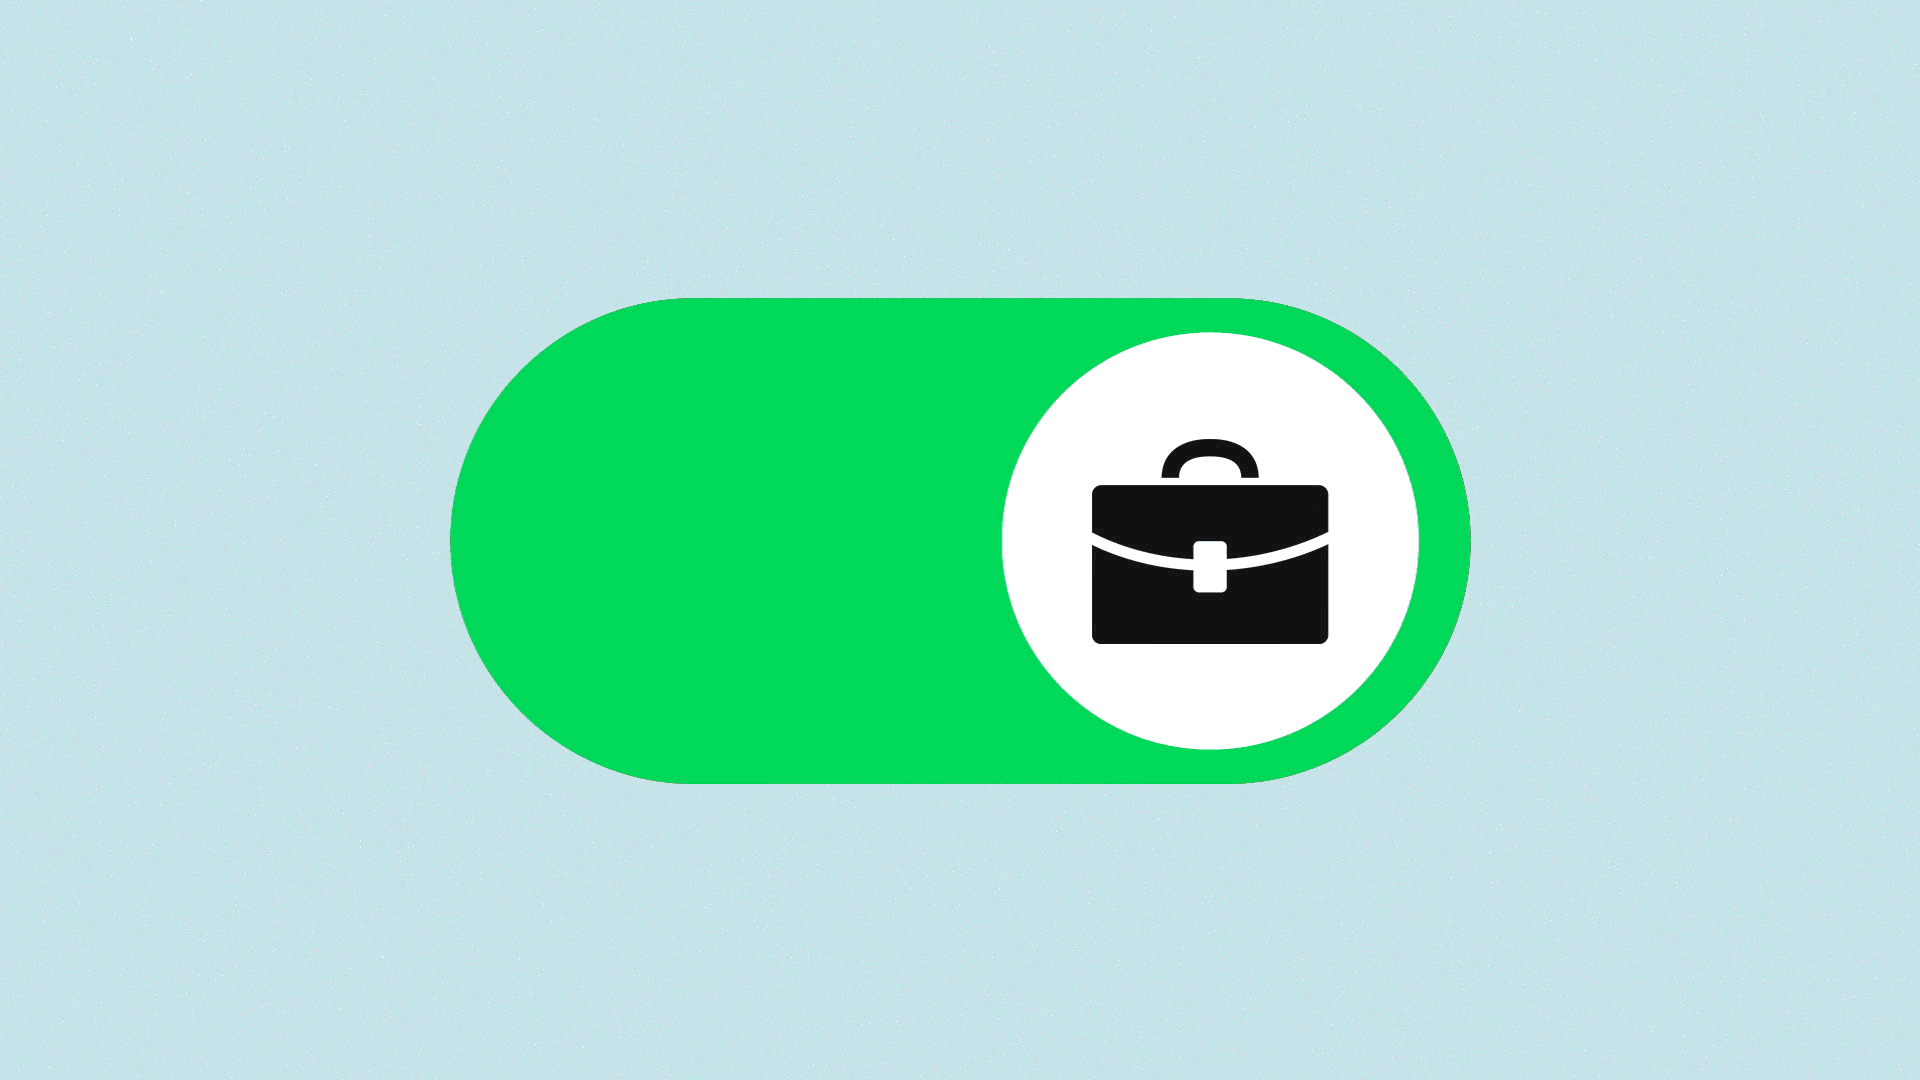 Illustration of a switch with a briefcase icon, switching from on to off.